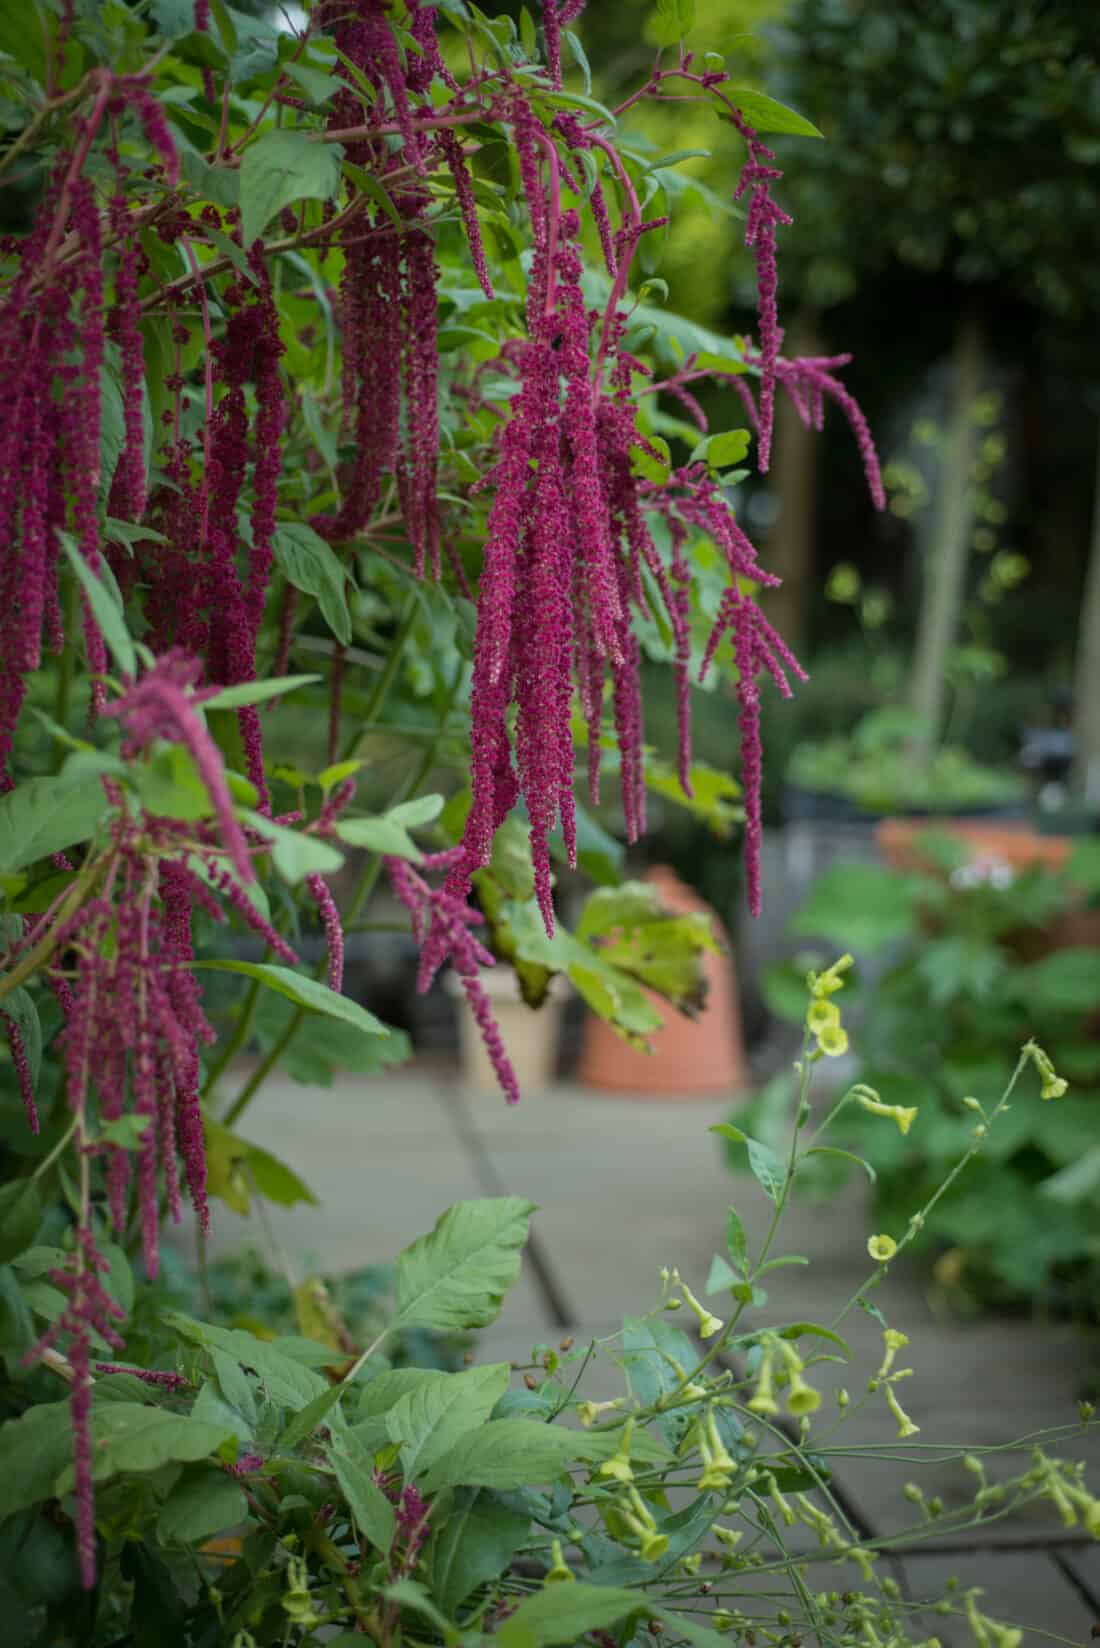 Long, hanging clusters of vibrant purple flowers contrast with green foliage in a garden, with blurred terracotta pots visible in the background.